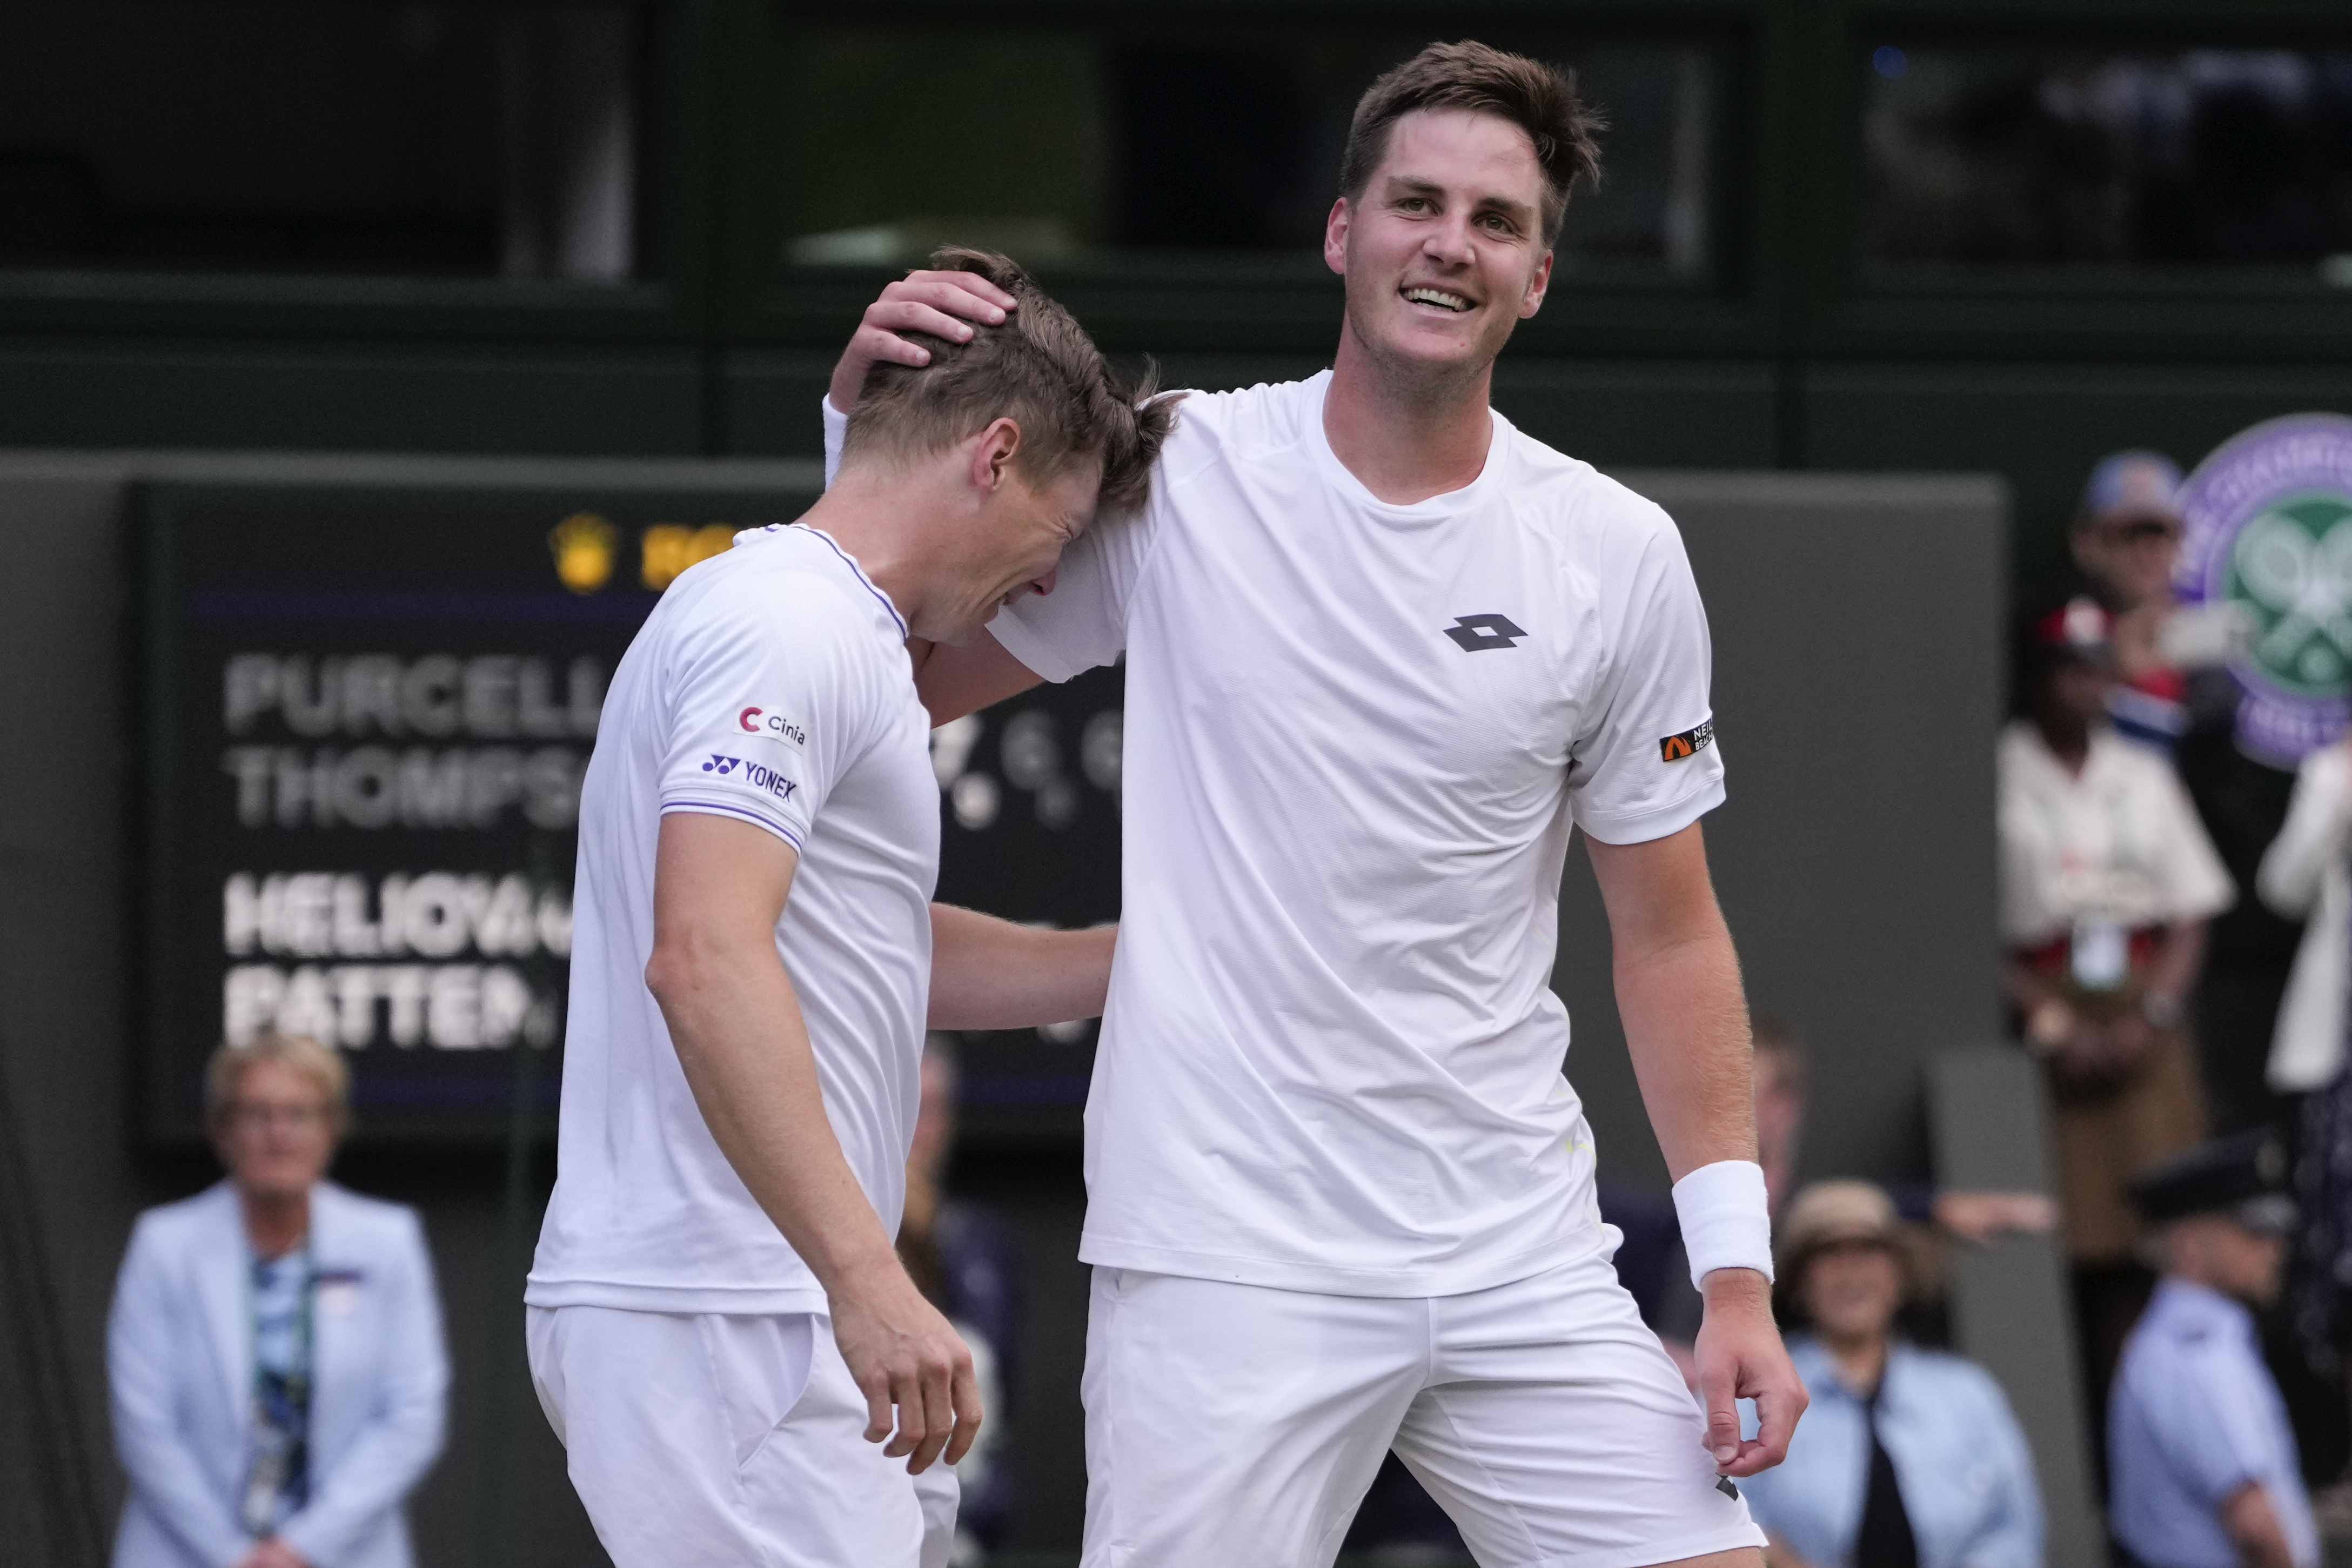 Harri Heliovaara, left, of Finland and Henry Patten of Britain celebrate after defeating Australia's Max Purcell and compatriot Jordan Thompson in the men's doubles final at the Wimbledon tennis championships in London, Saturday, July 13, 2024.(AP Photo/Alberto Pezzali)